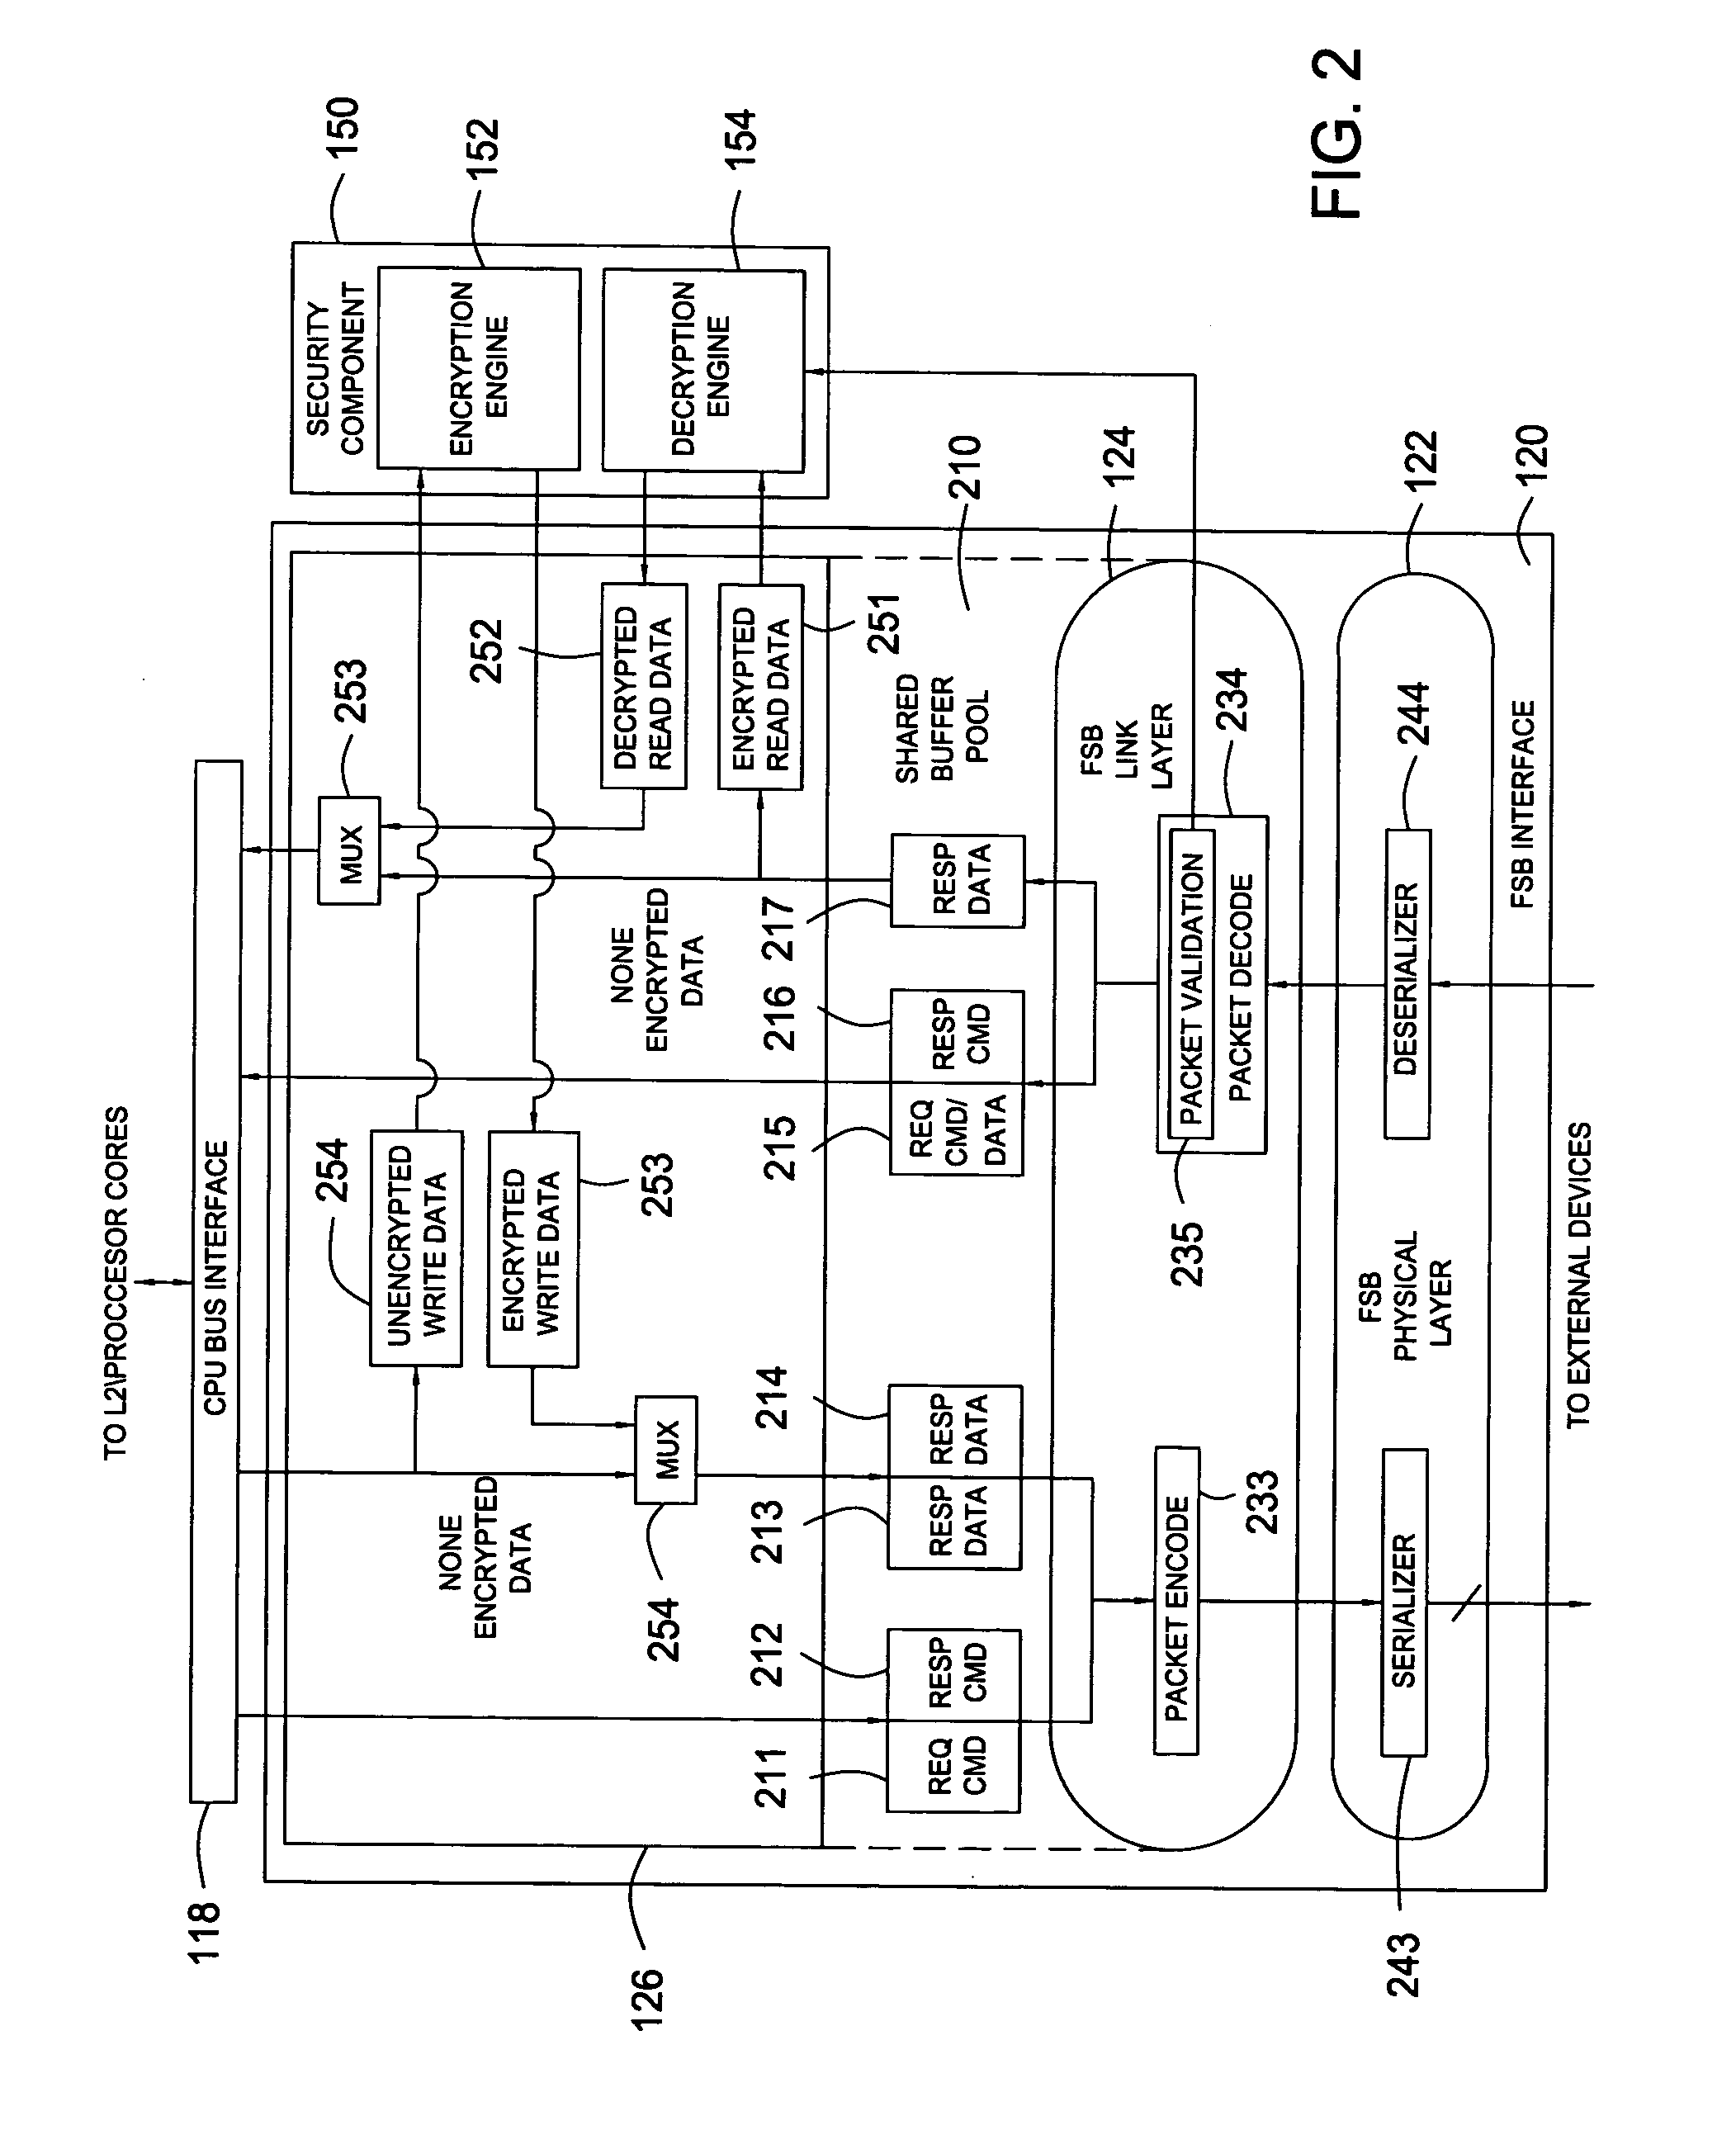 Low-latency data decryption interface